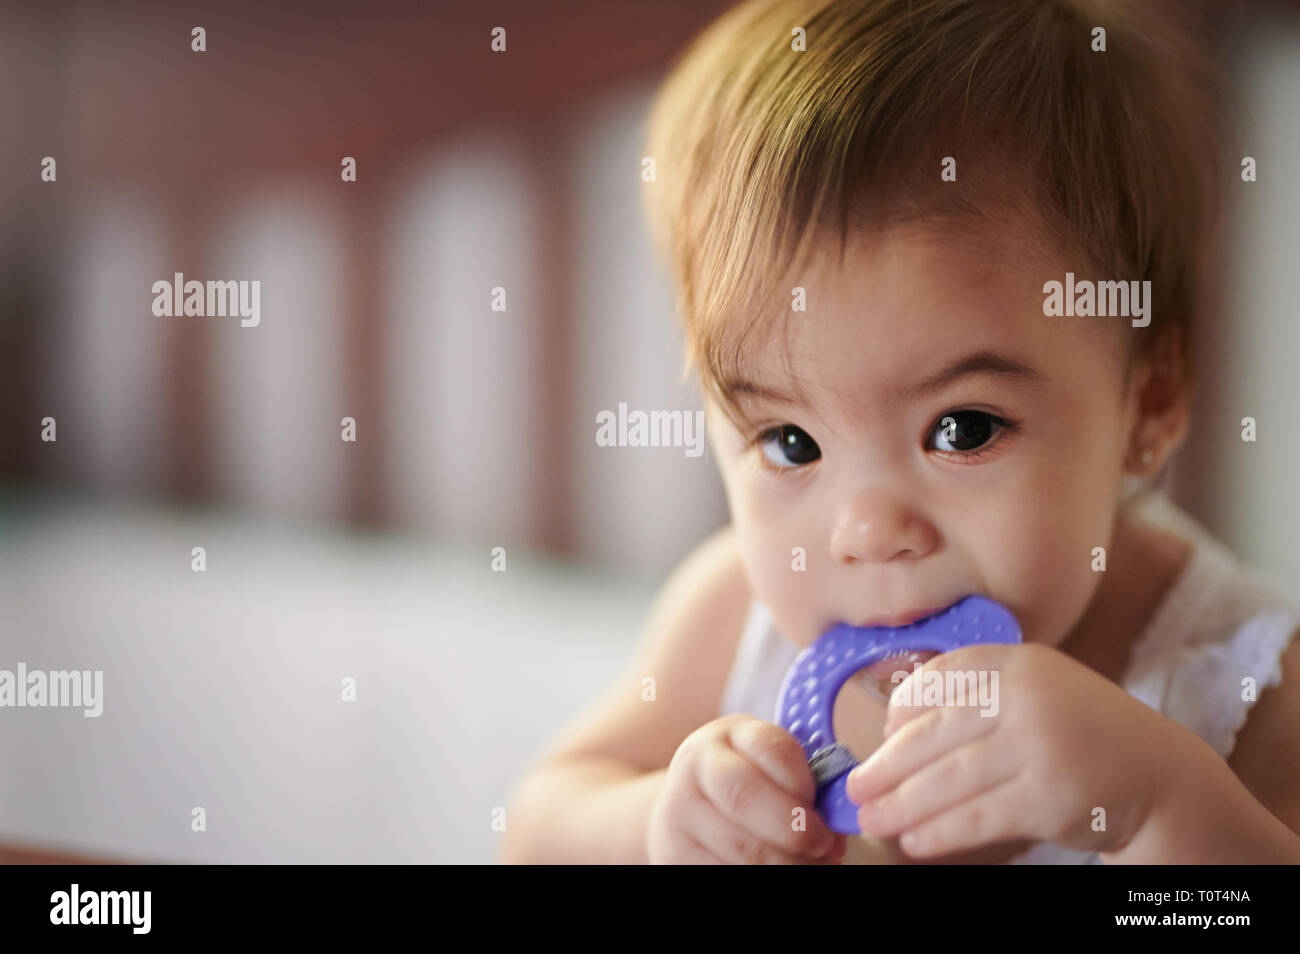 Small kid with itchy teeth biting plastic purple toy Stock Photo